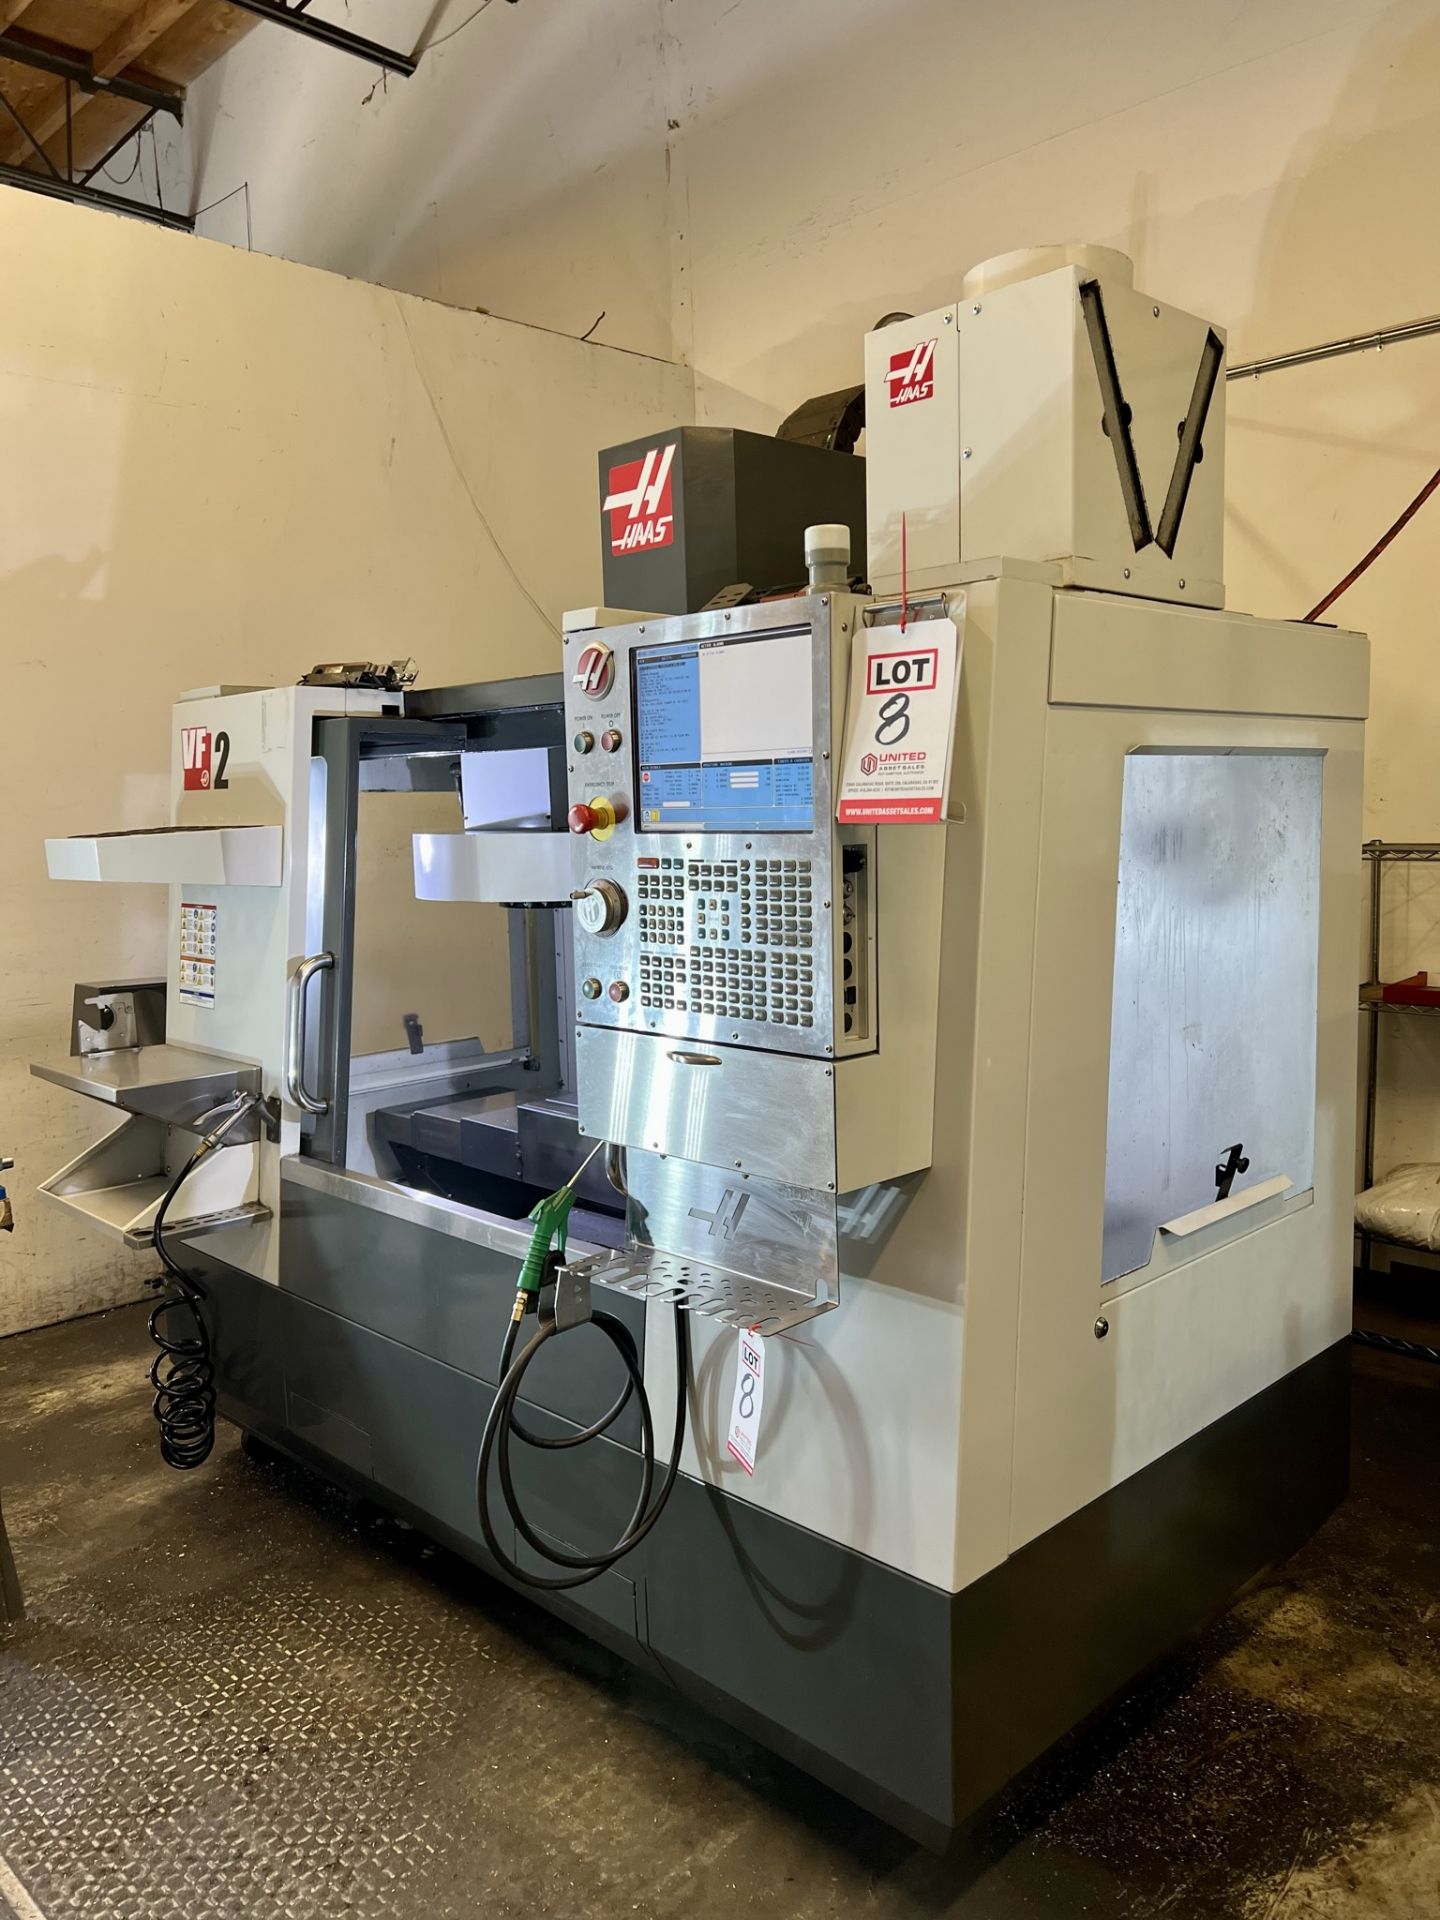 2015 HAAS VF-2 VERTICAL MACHINING CENTER, XYZ TRAVELS: 30" X 16" X 20", 36" X 14" TABLE, PROBING - Image 3 of 24